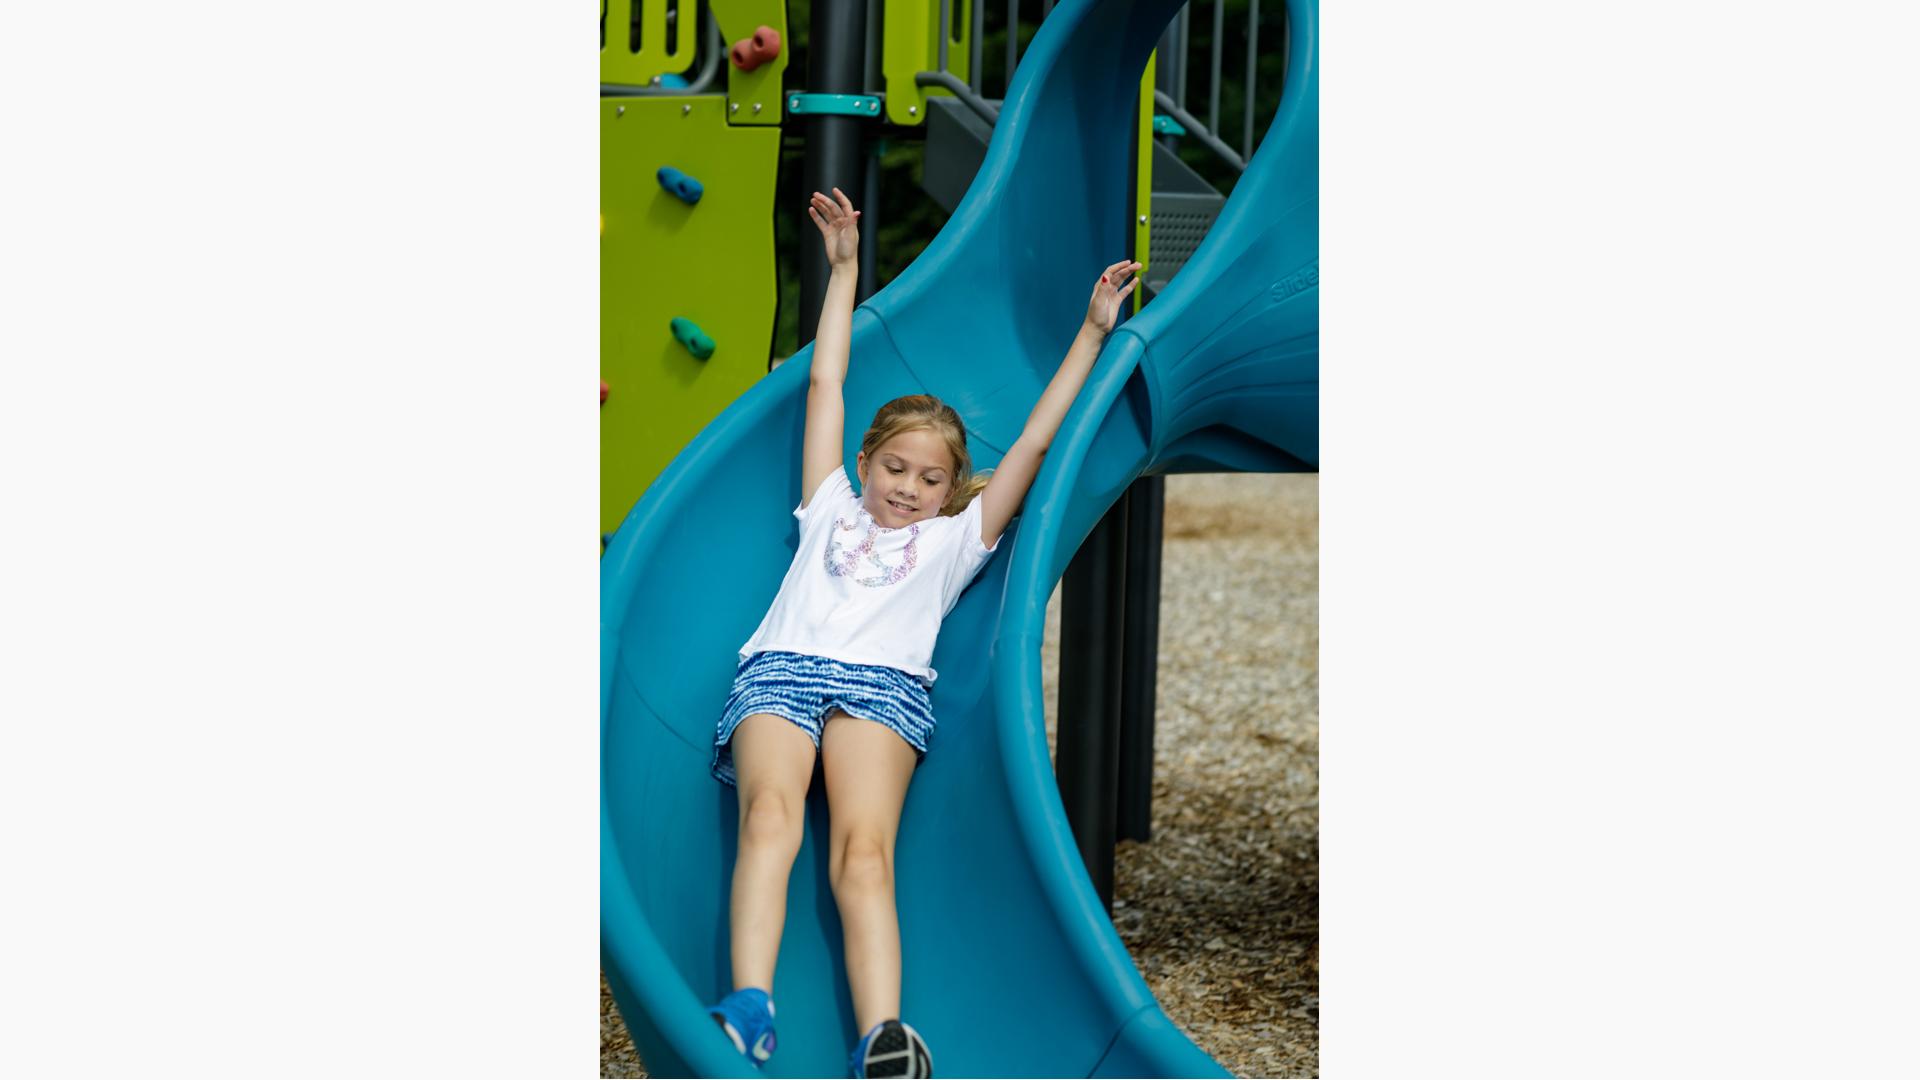 Girl rides down slide with arms up in the air